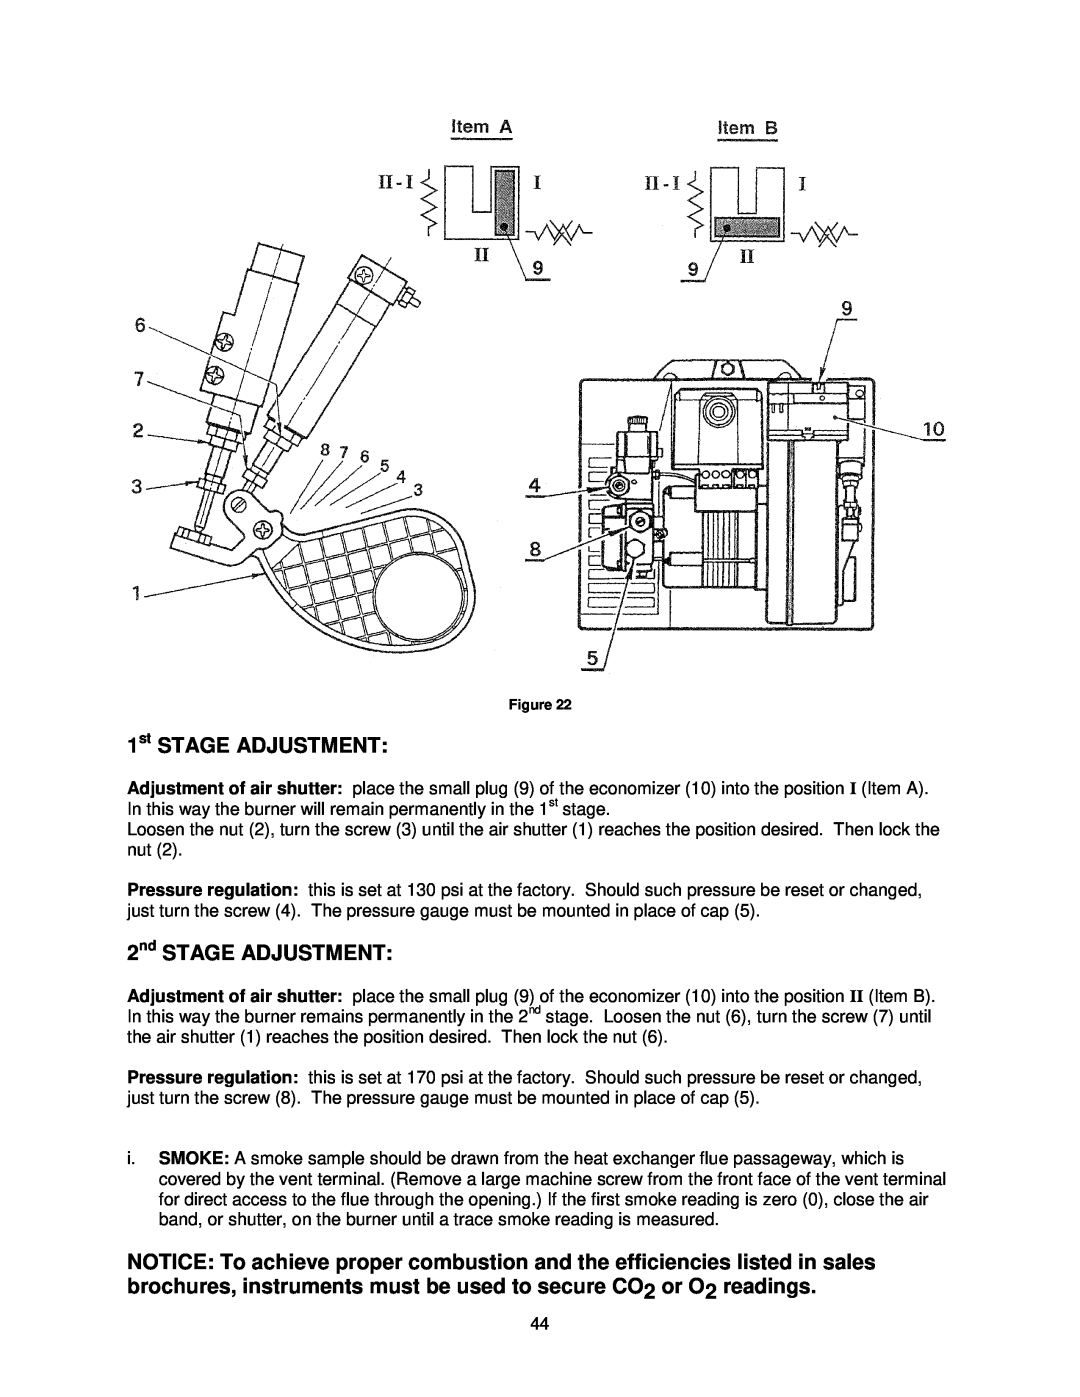 Thermo Products OHFA199DV5R, OHFA199DV5B operation manual 1st STAGE ADJUSTMENT, 2nd STAGE ADJUSTMENT 